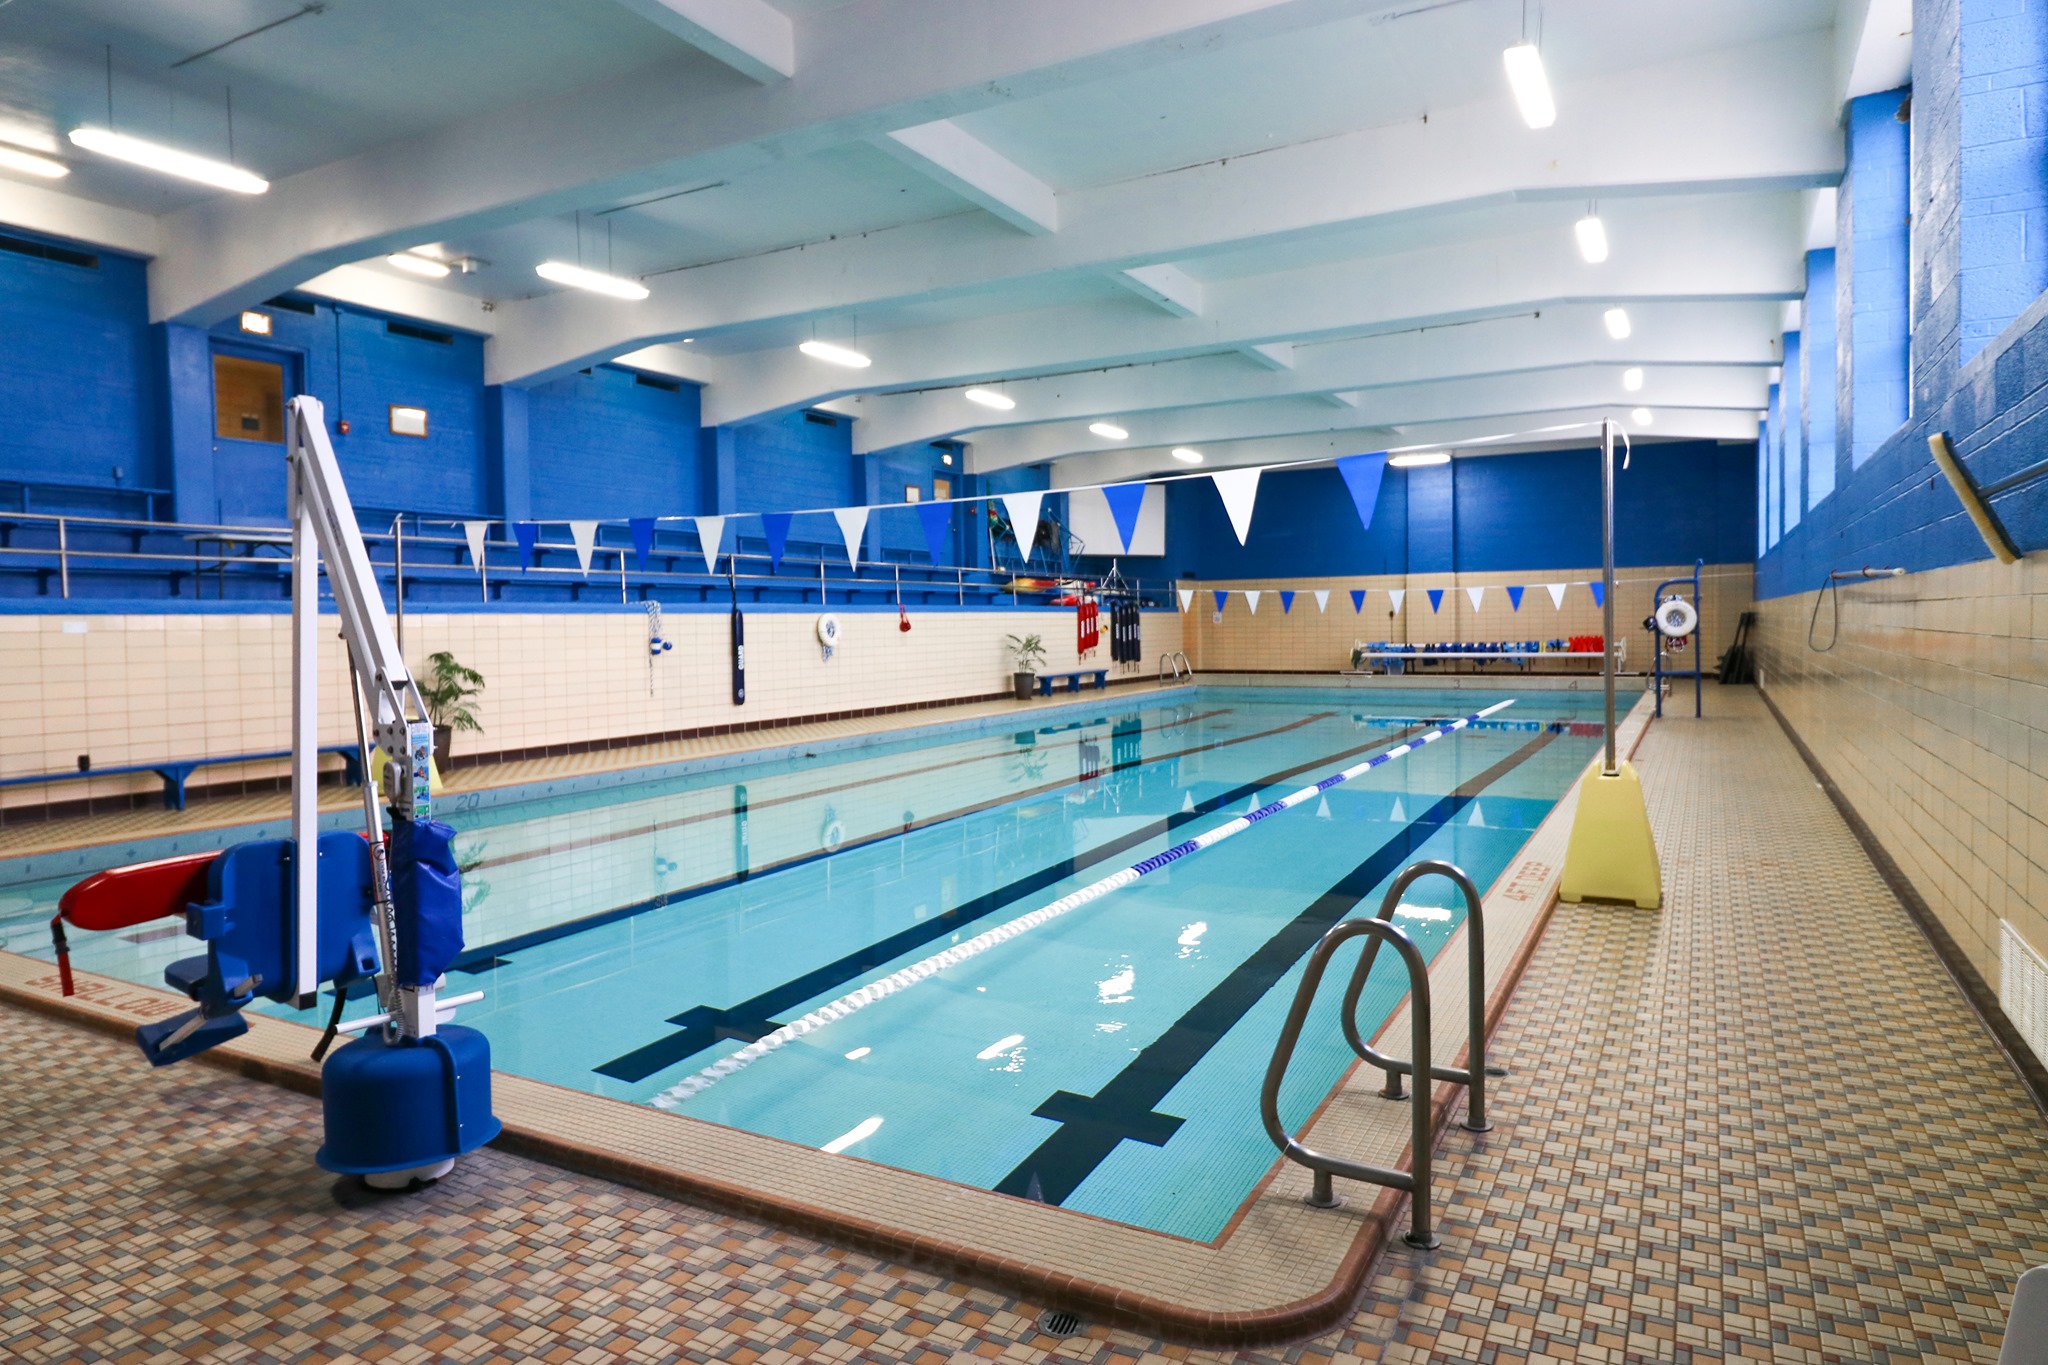 An indoor swimming pool divided into swim lanes with blue and white flags hanging above the pool.